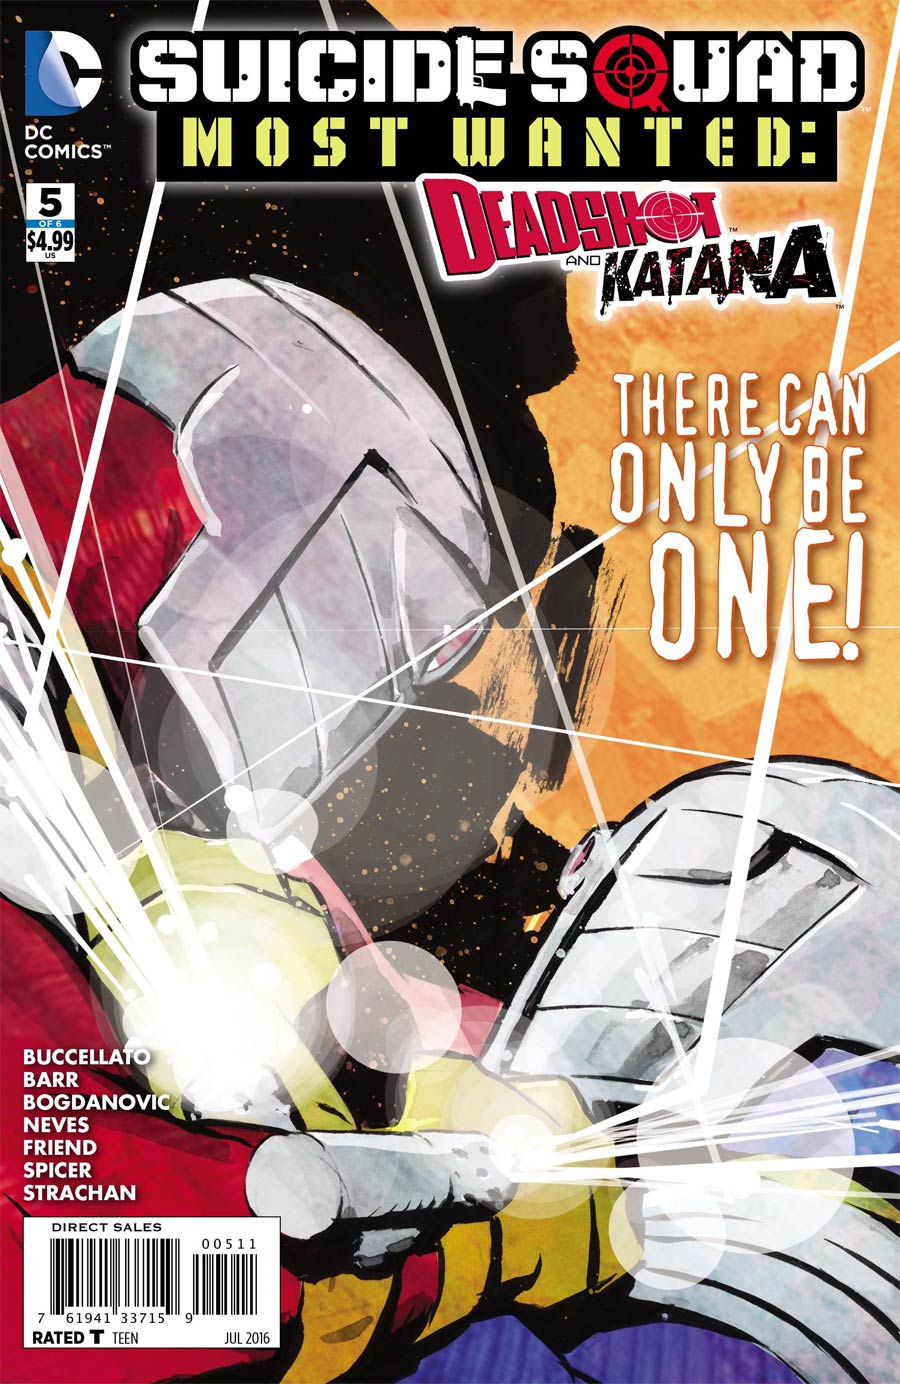 Suicide Squad Most Wanted Deadshot Katana #5